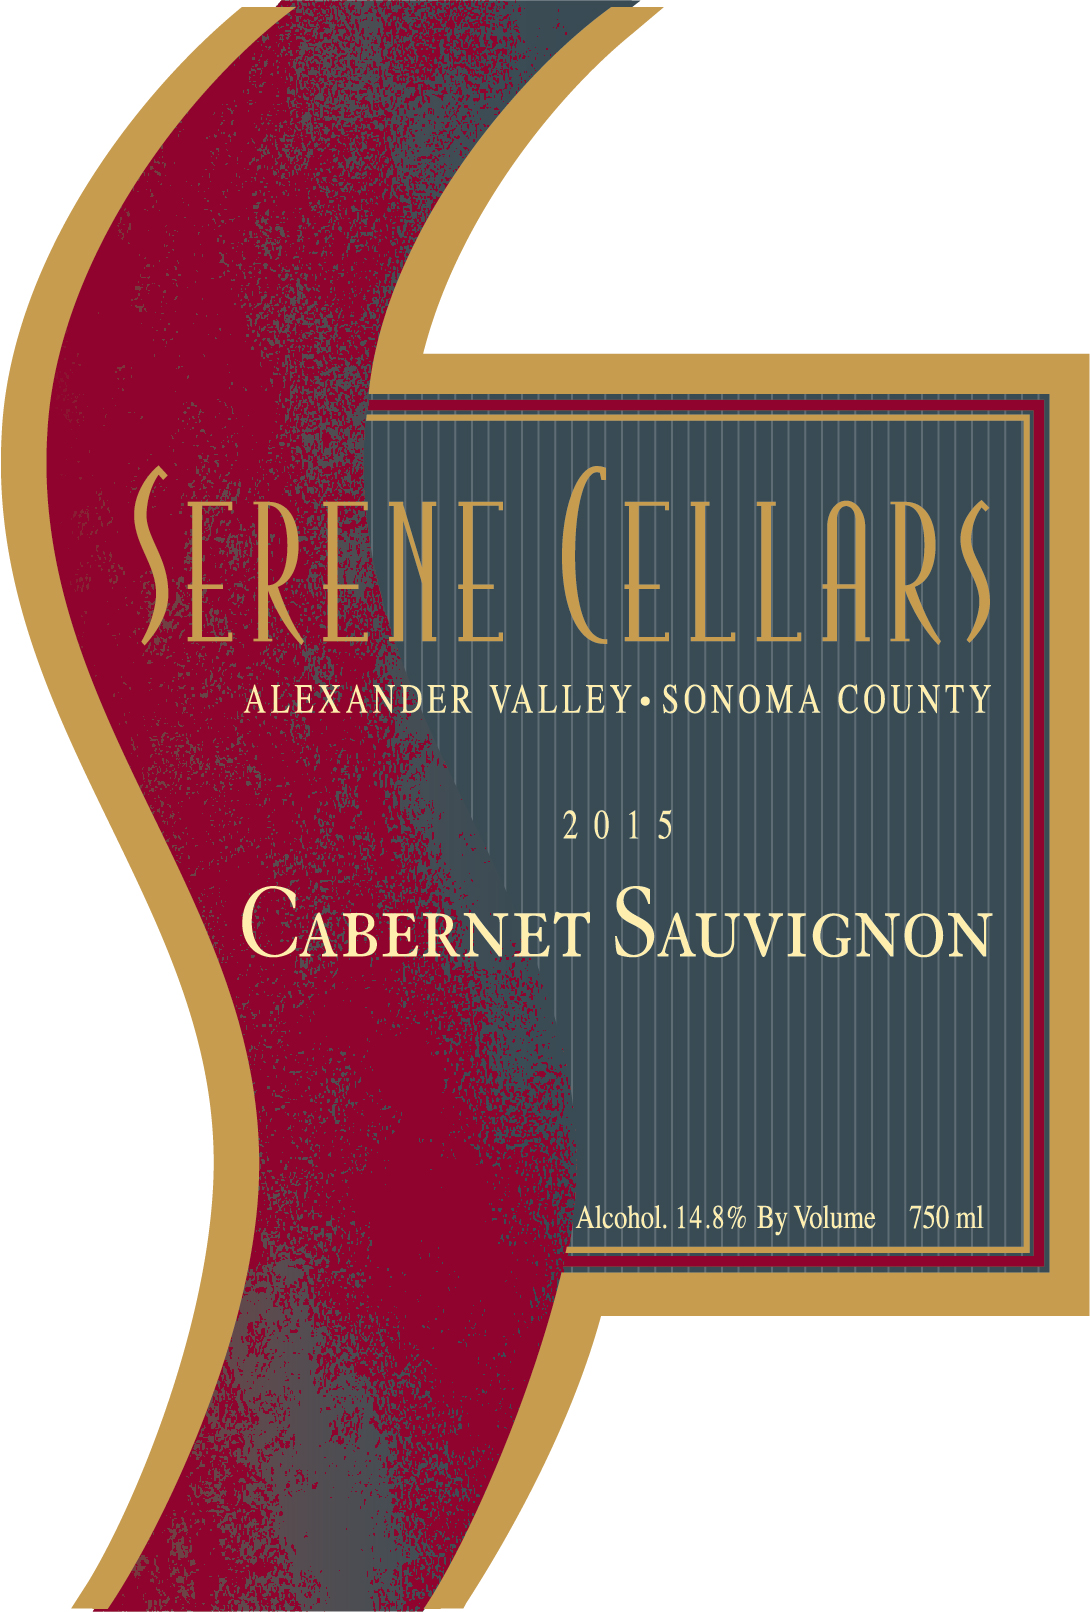 Product Image for 2015 Alexander Valley Cabernet Sauvignon "Indiscretion"